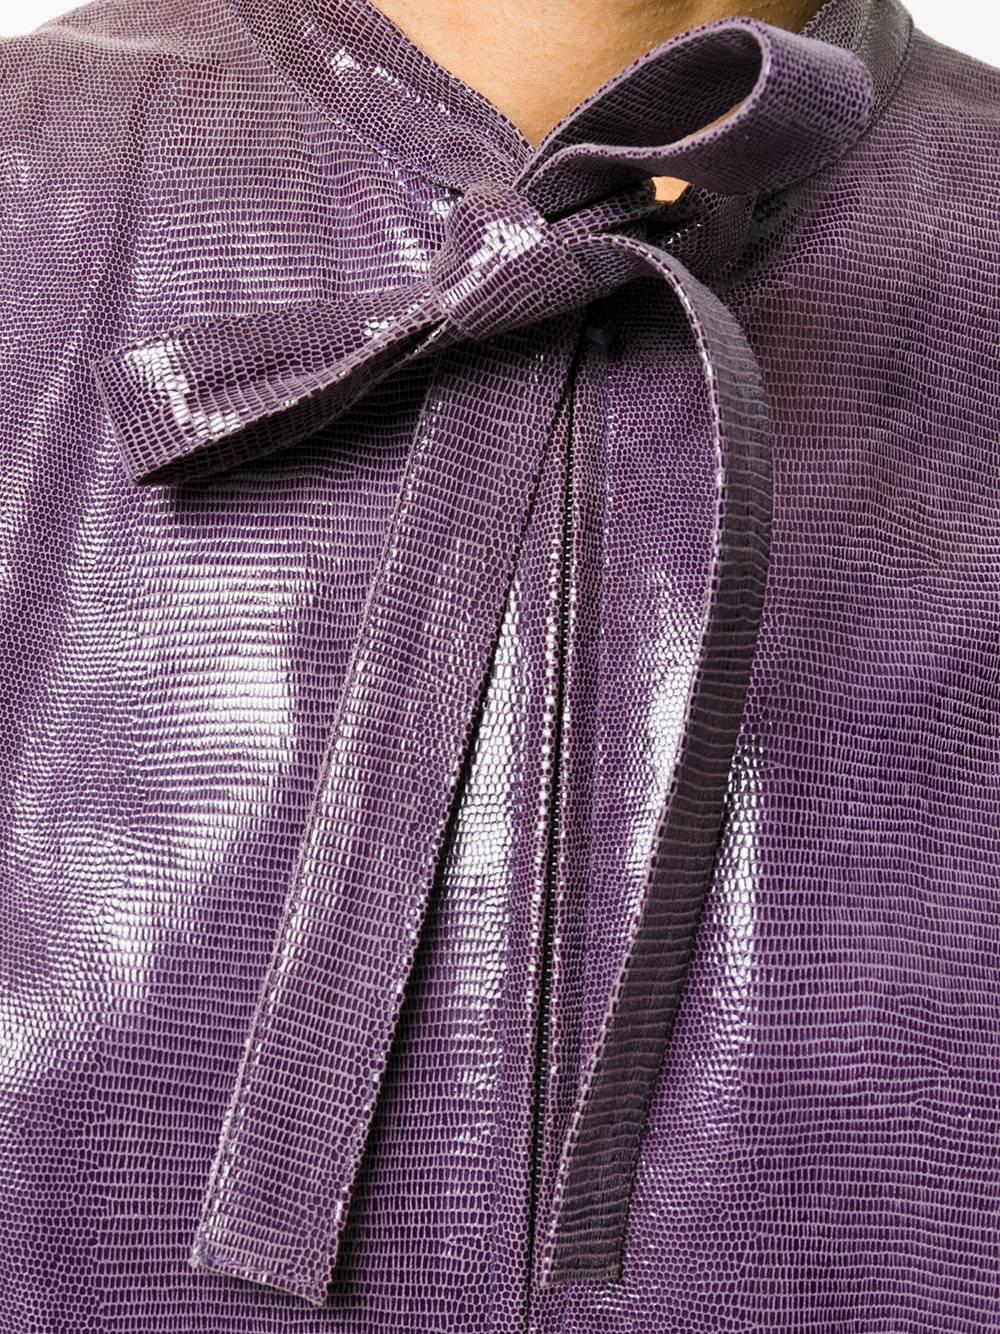 This trendy blouse was crafted from purple goatskin, finished with a glossy effect and a distinct, minimal pattern. It features a pussy bow fastening on the neck, followed by an invisible front zip fastening. This sleeveless design presents a boxy